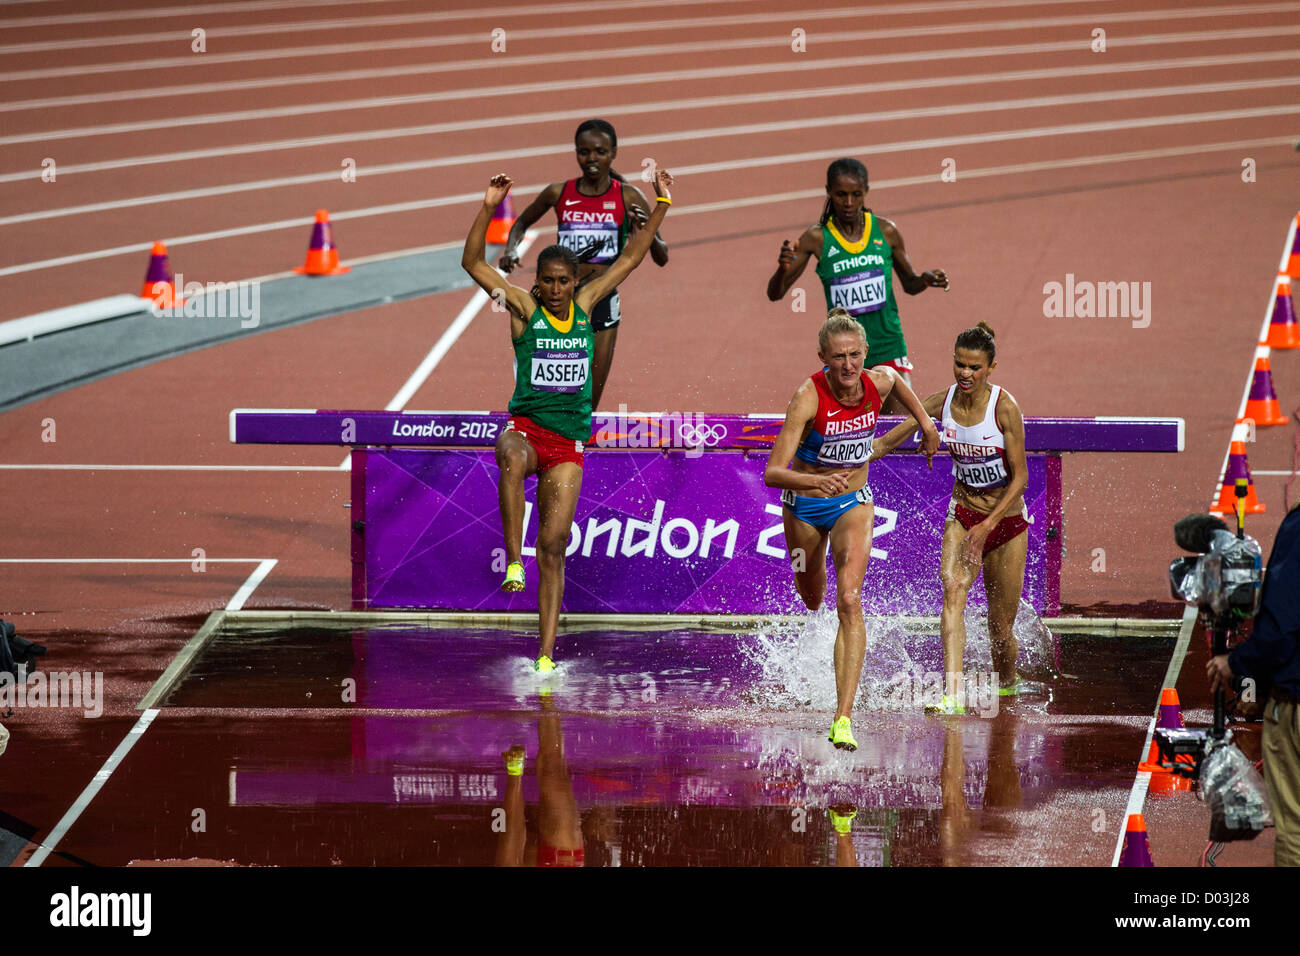 Action of women competing in the Women's 3000m Steeplechase at the